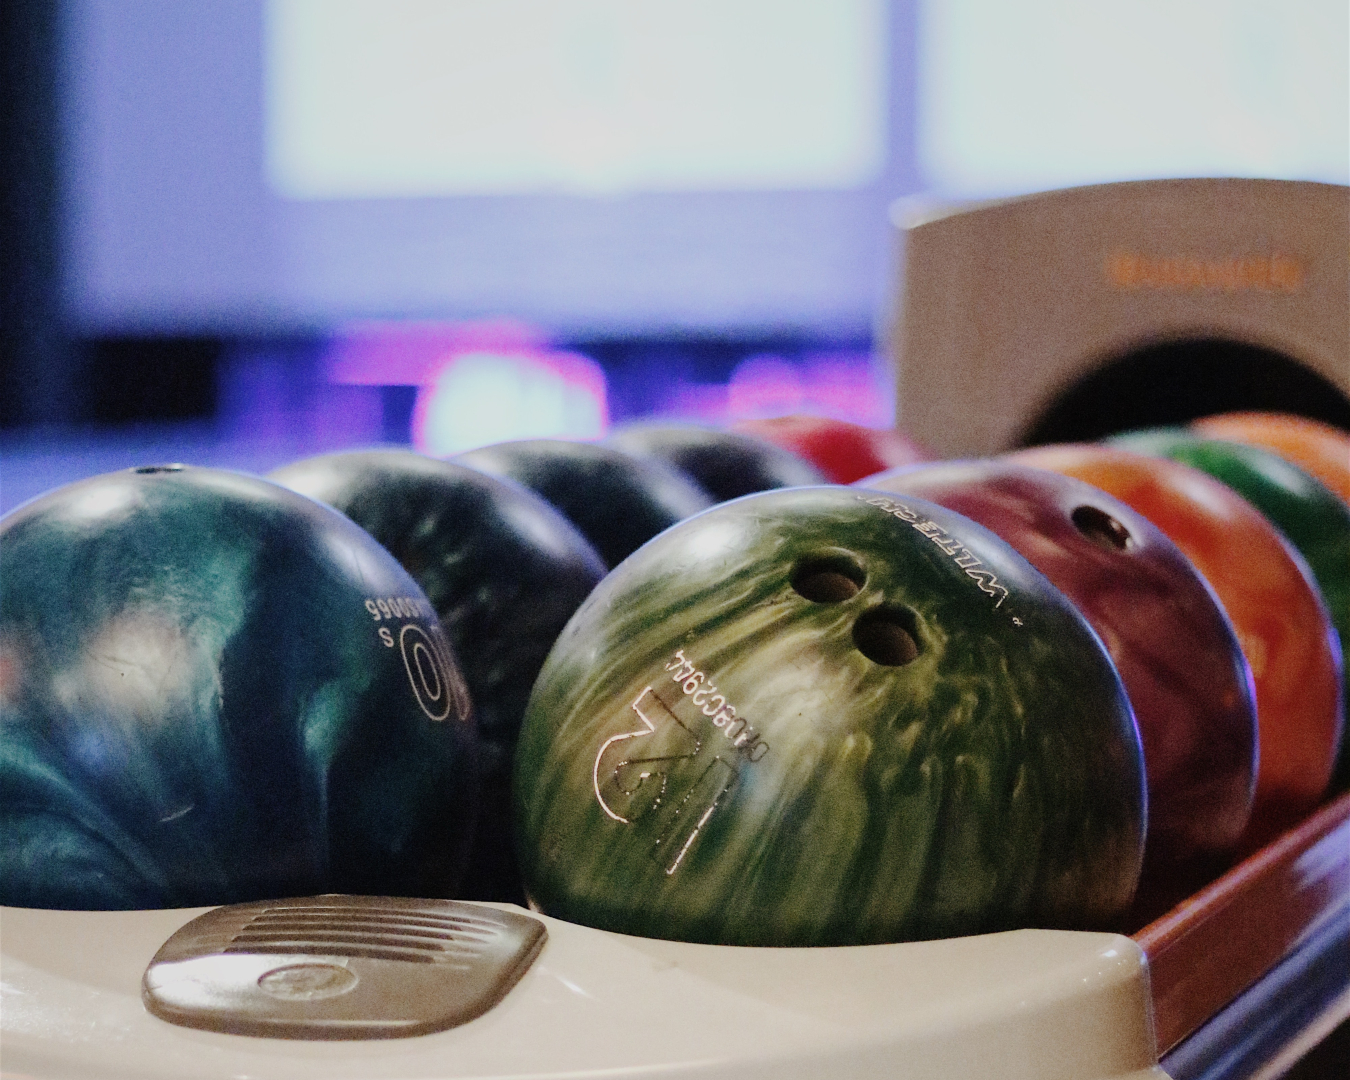 A close-up of the colourful bowling balls waiting to be used